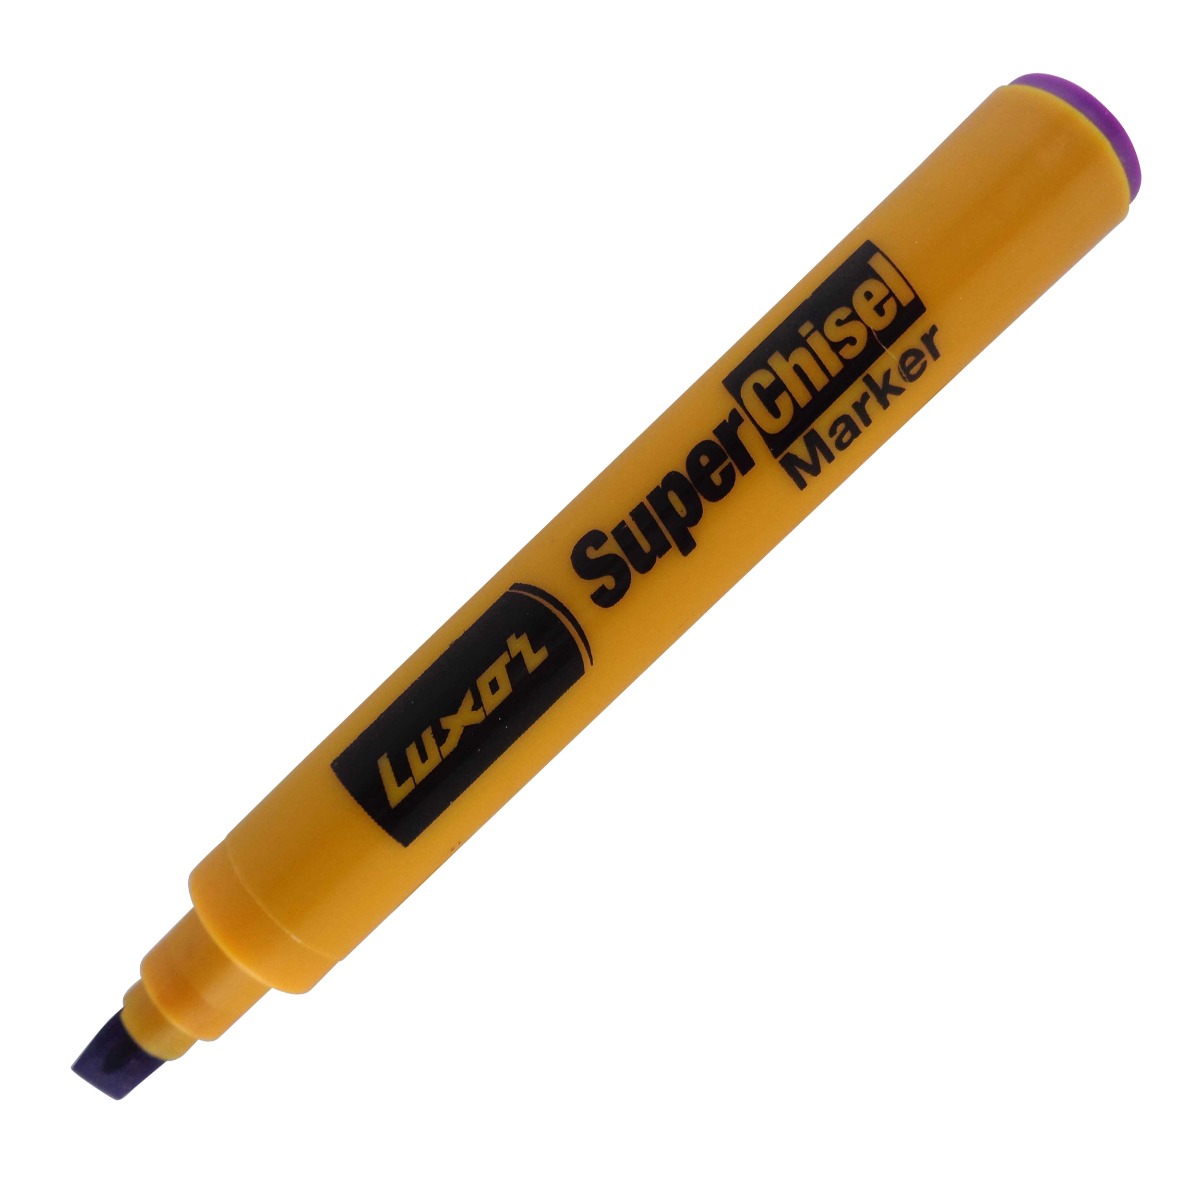 Luxor Model: 15100 Super chisel Yellow color body with Purple color cap with Purple ink marker